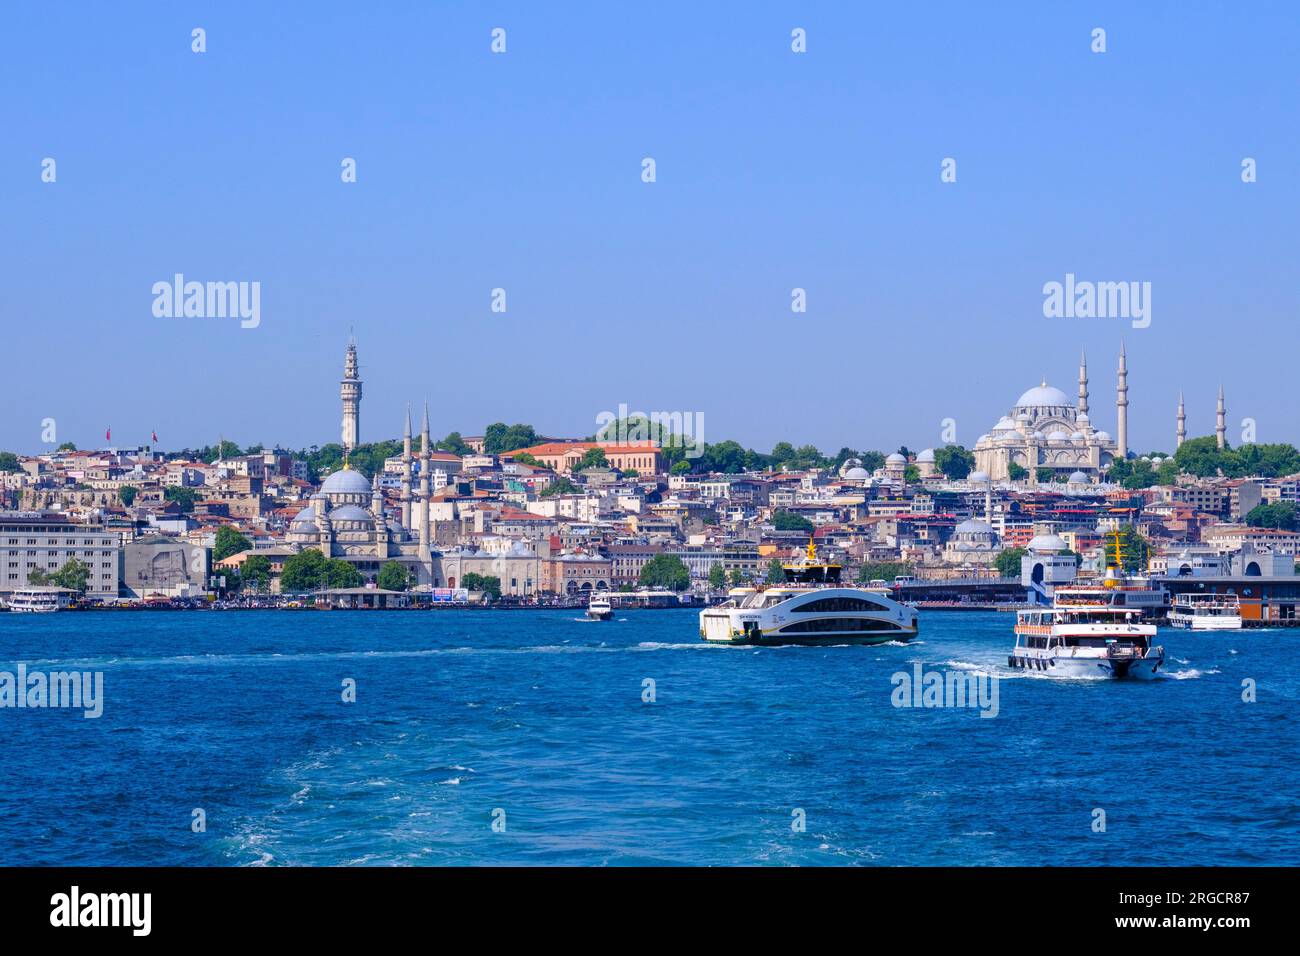 Istanbul, Turkey, Türkiye. Commuter Ferries on the Golden Horn. Suleymaniye Mosque in background on right; New Mosque (Yeni Camii) in foreground left. Stock Photo